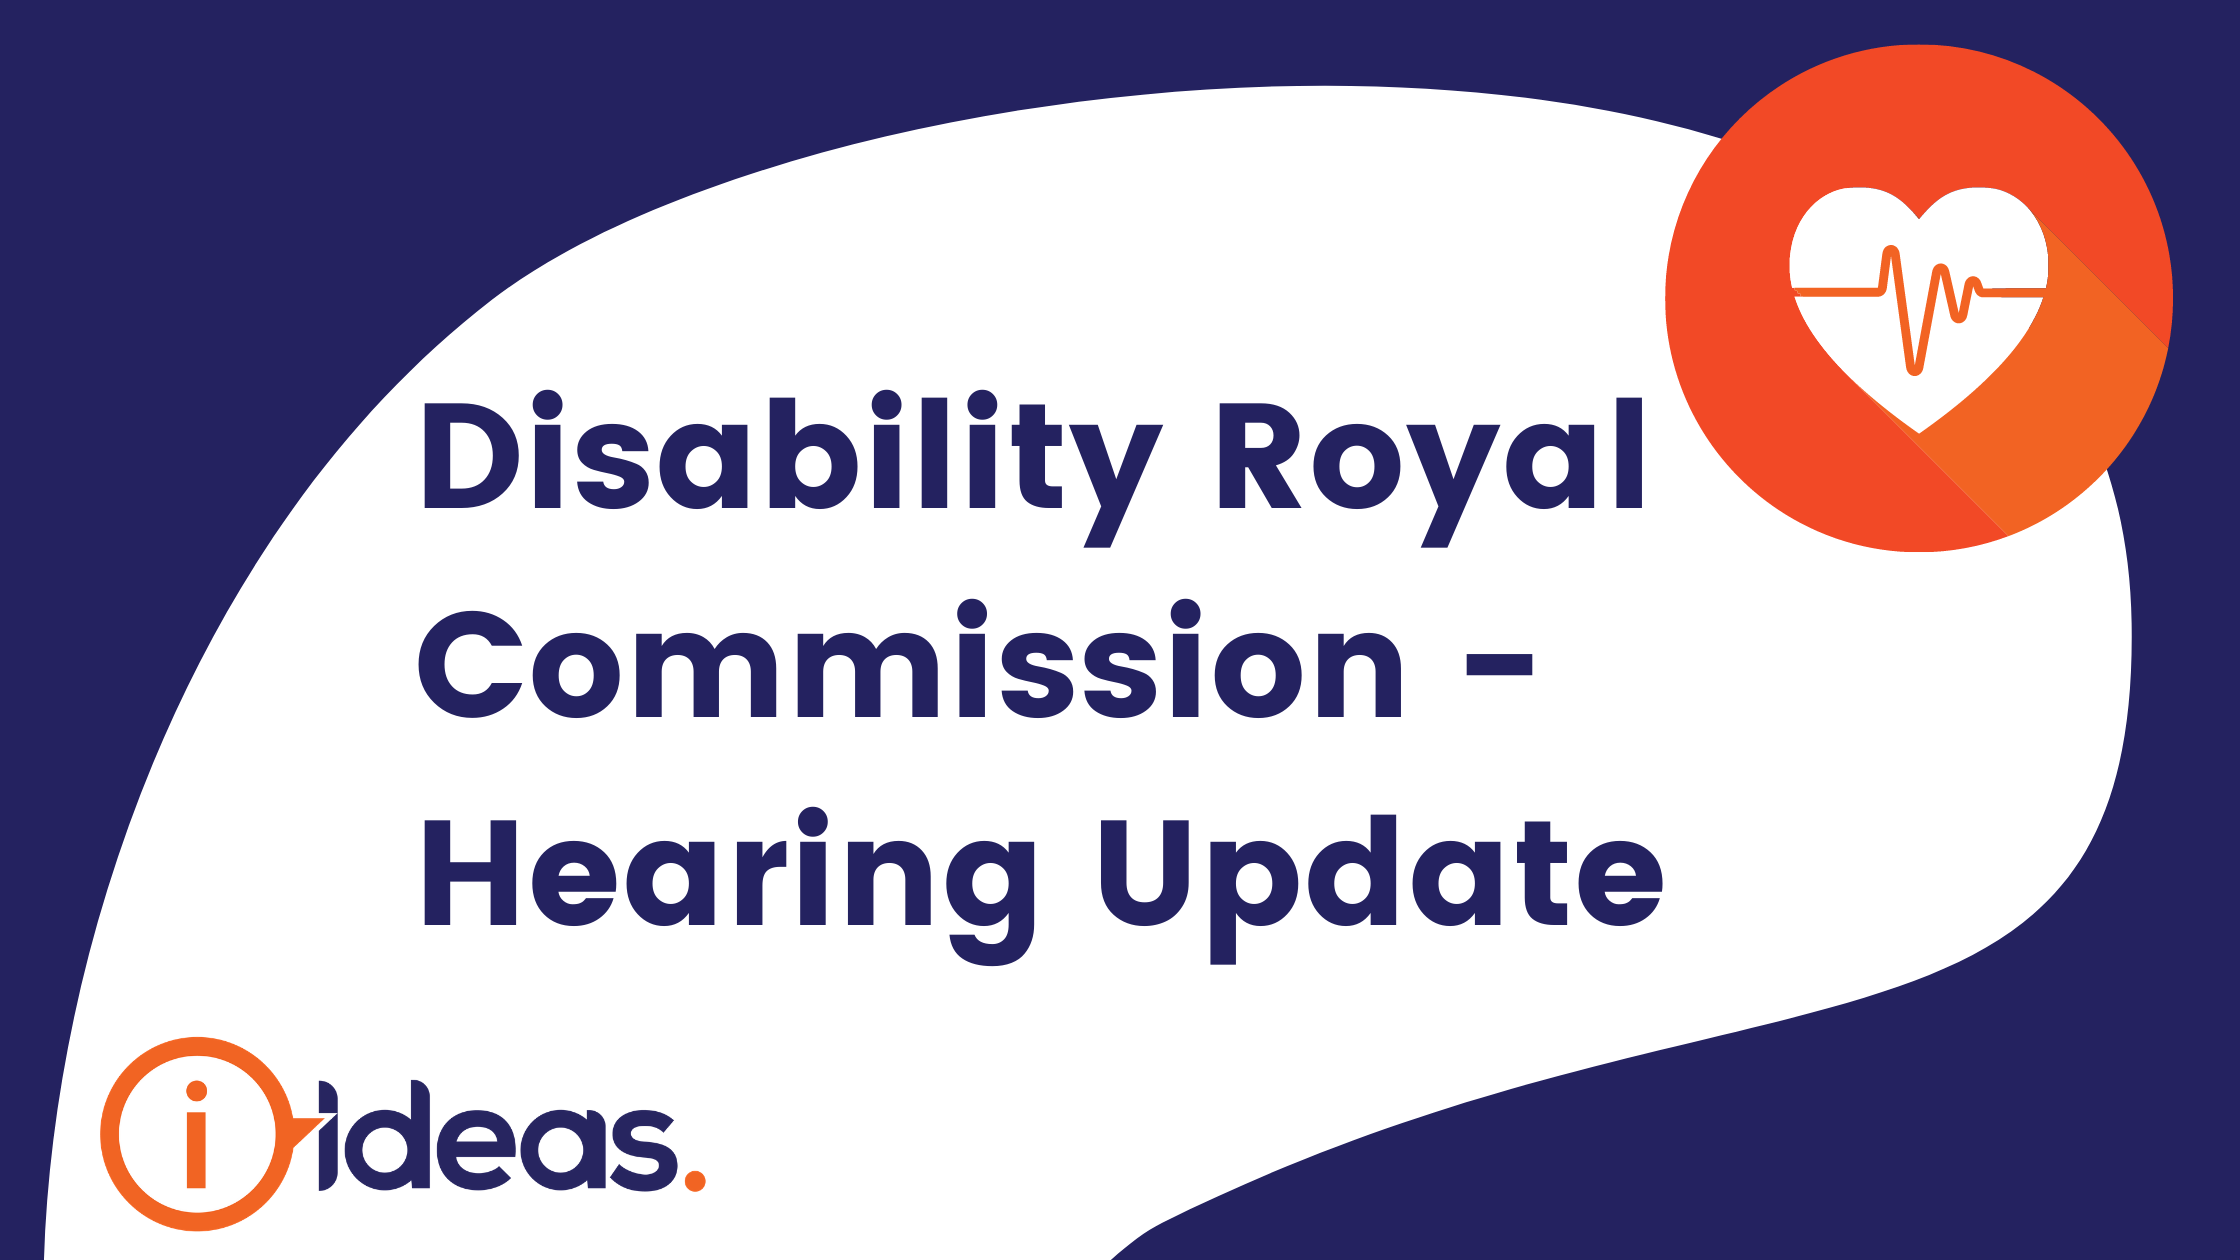 Disability Royal Commission - Hearing Update